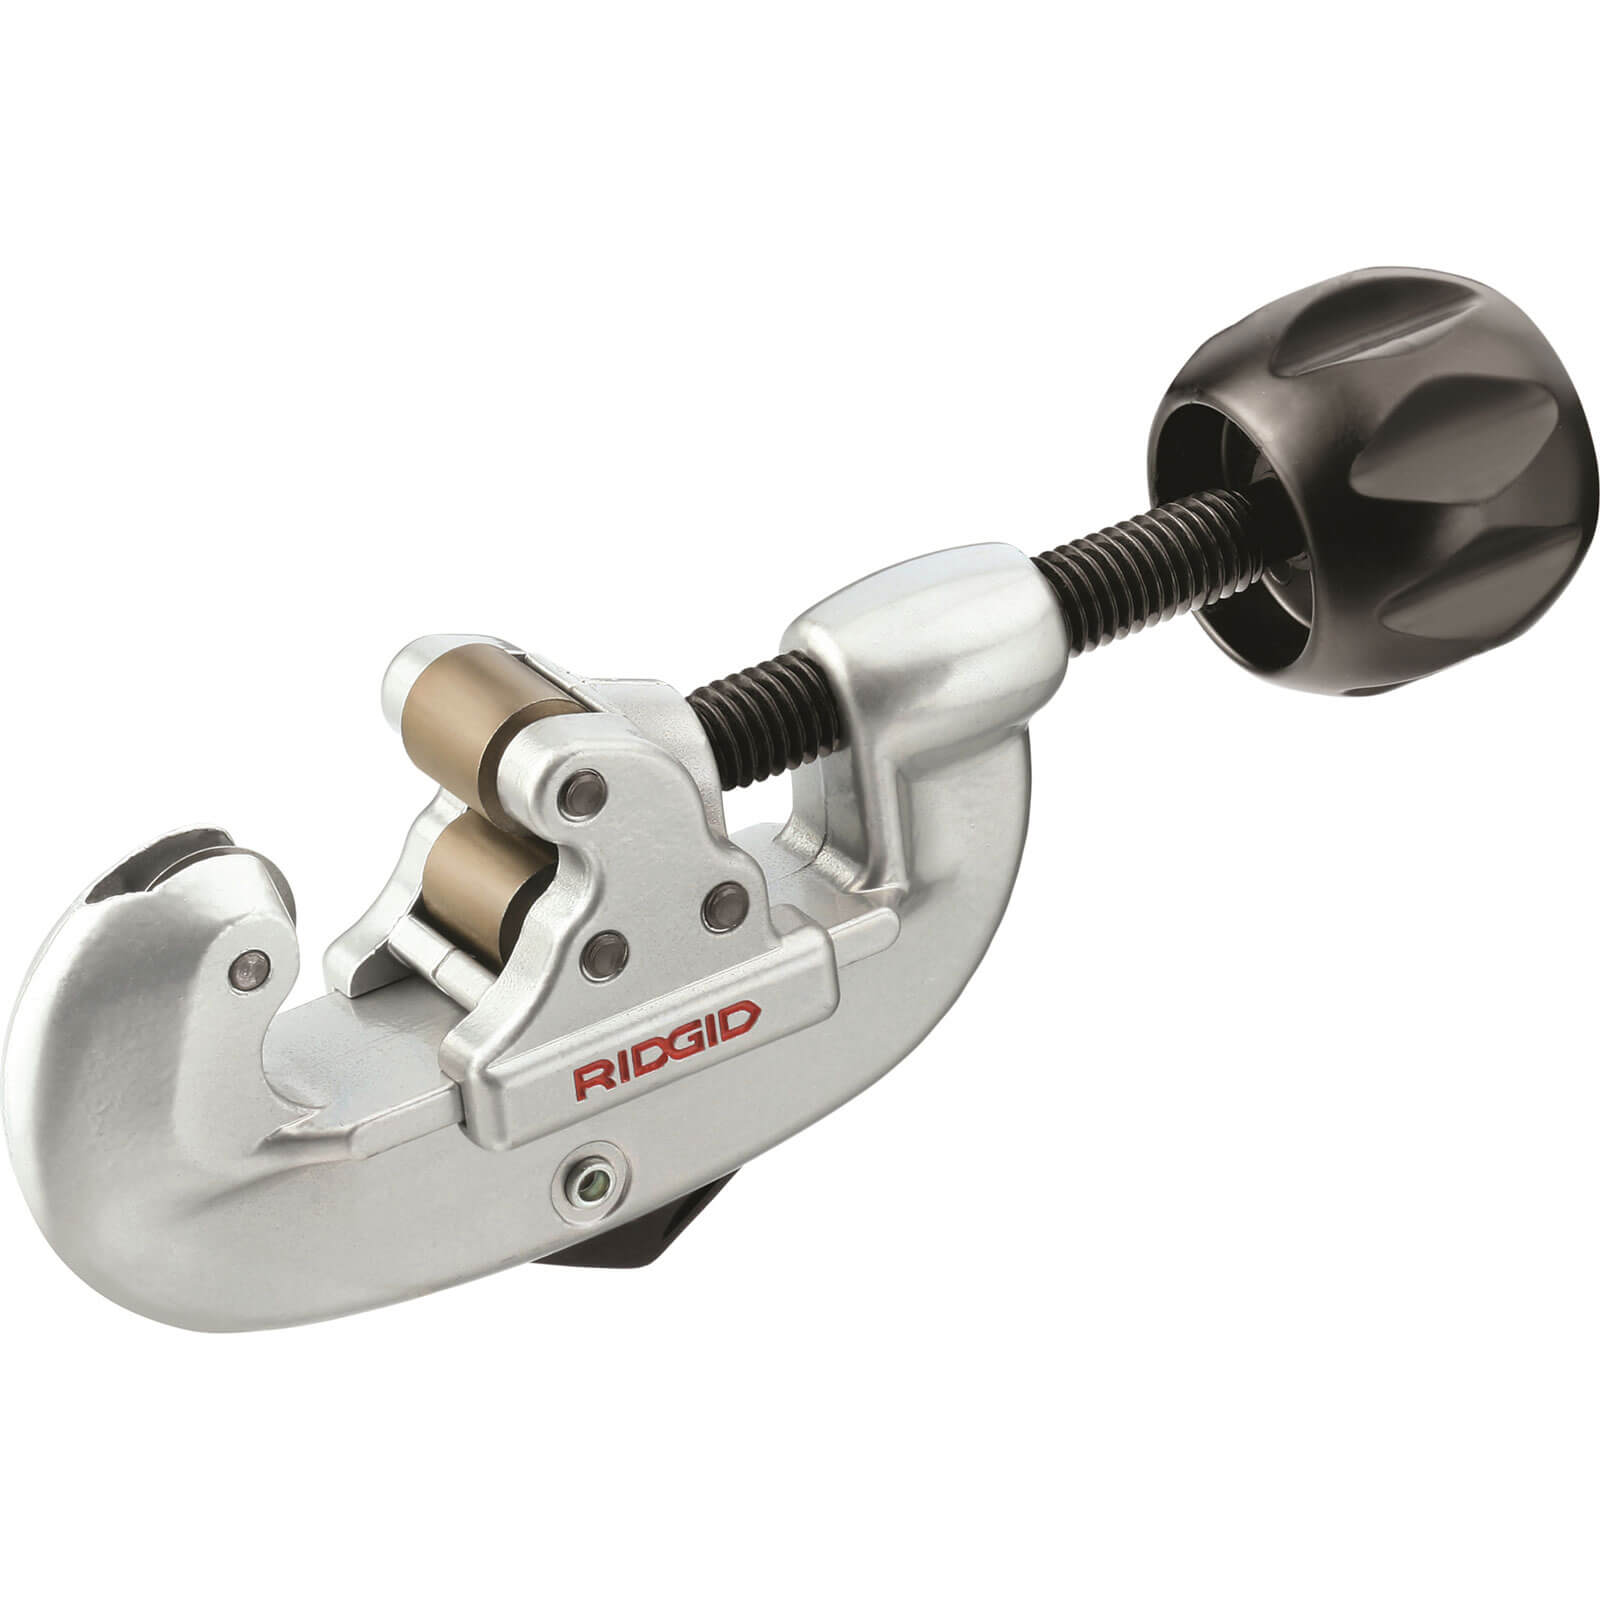 Photo of Ridgid Adjustable Pipe Cutter For Stainless Steel Tubing And Conduits 5mm - 28mm